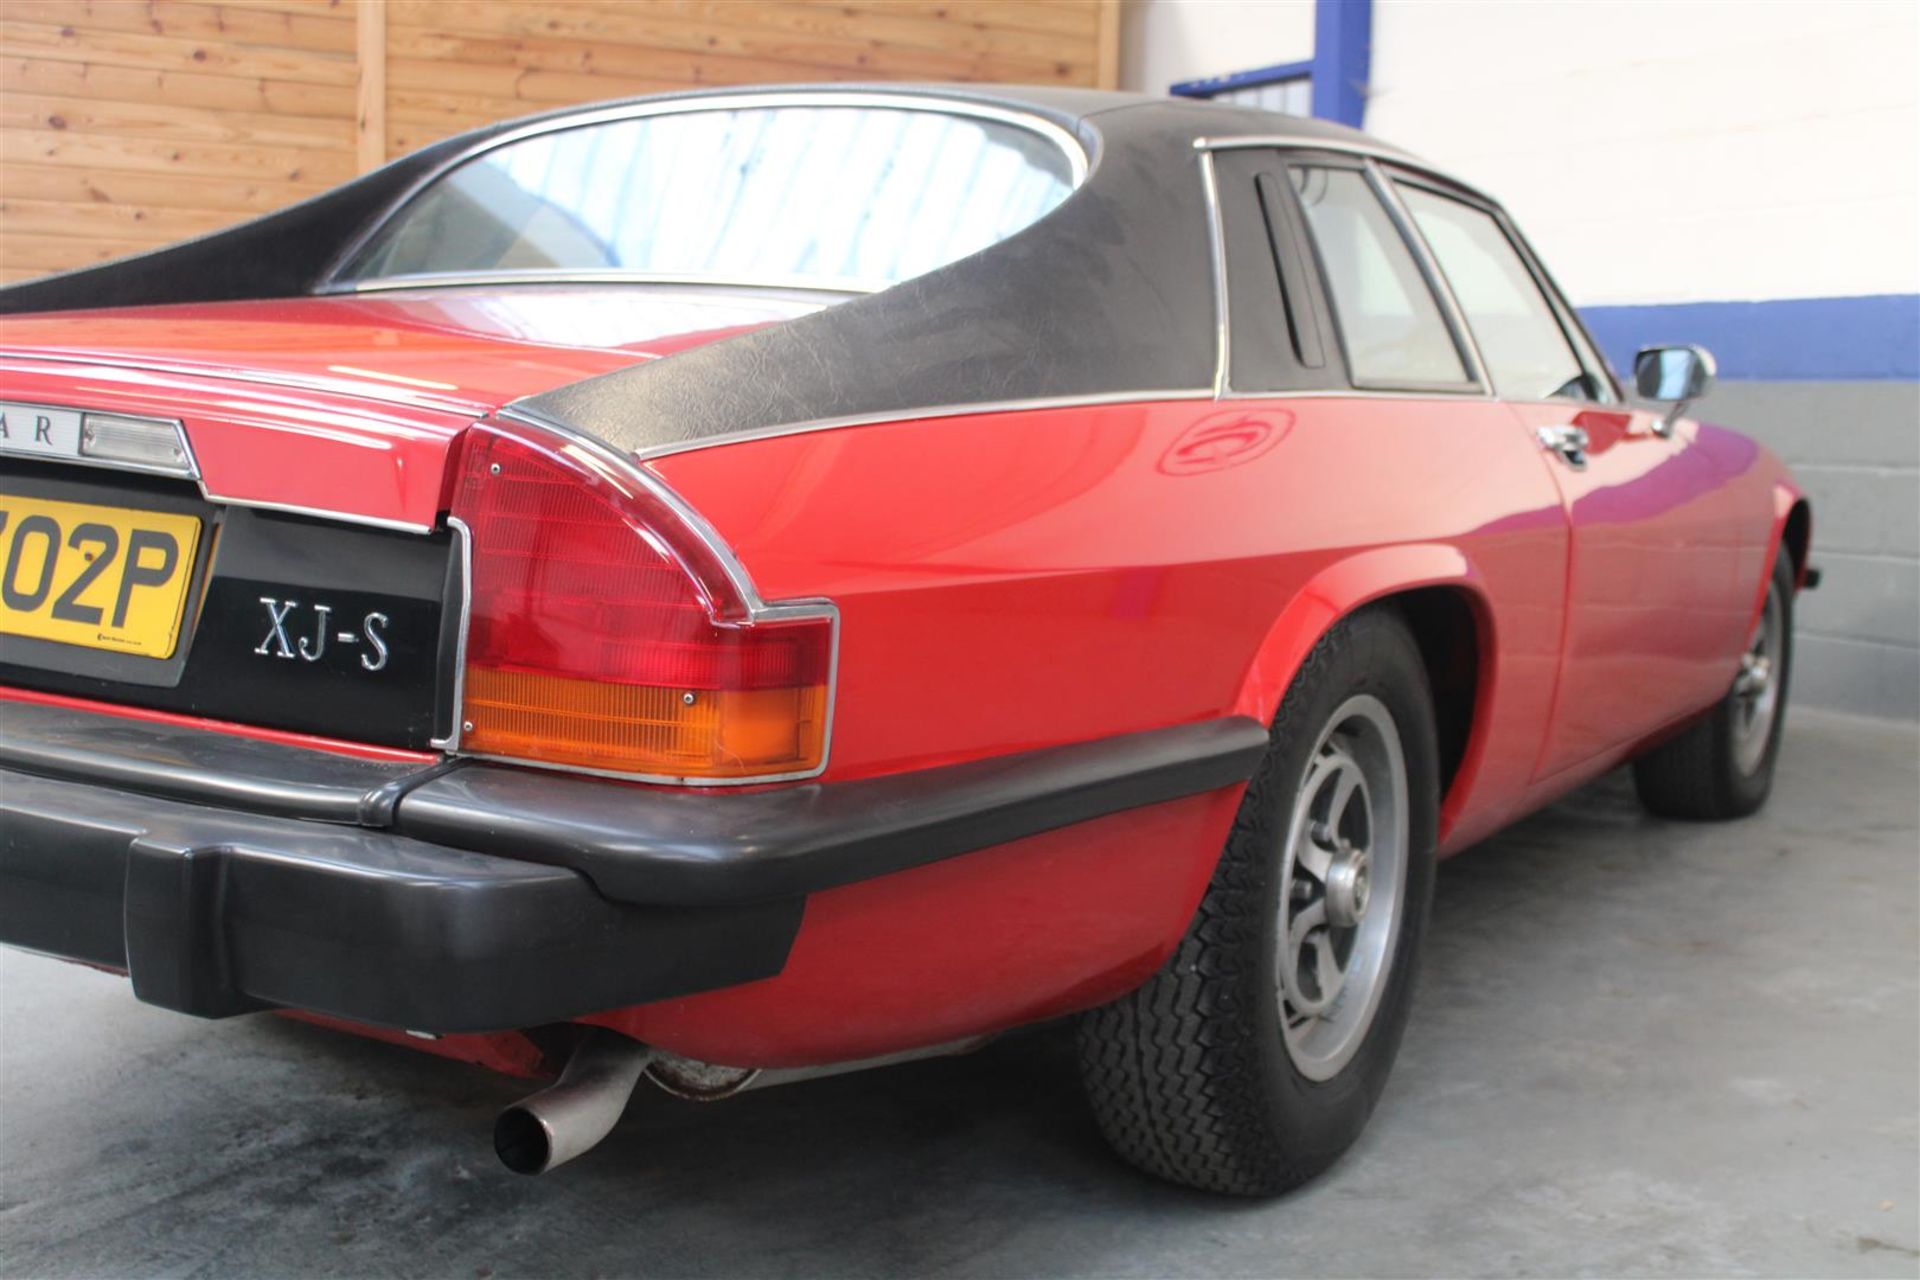 1976 Jaguar XJ-S 5.3 V12 Coupe Auto 29,030 miles from new - Image 20 of 23